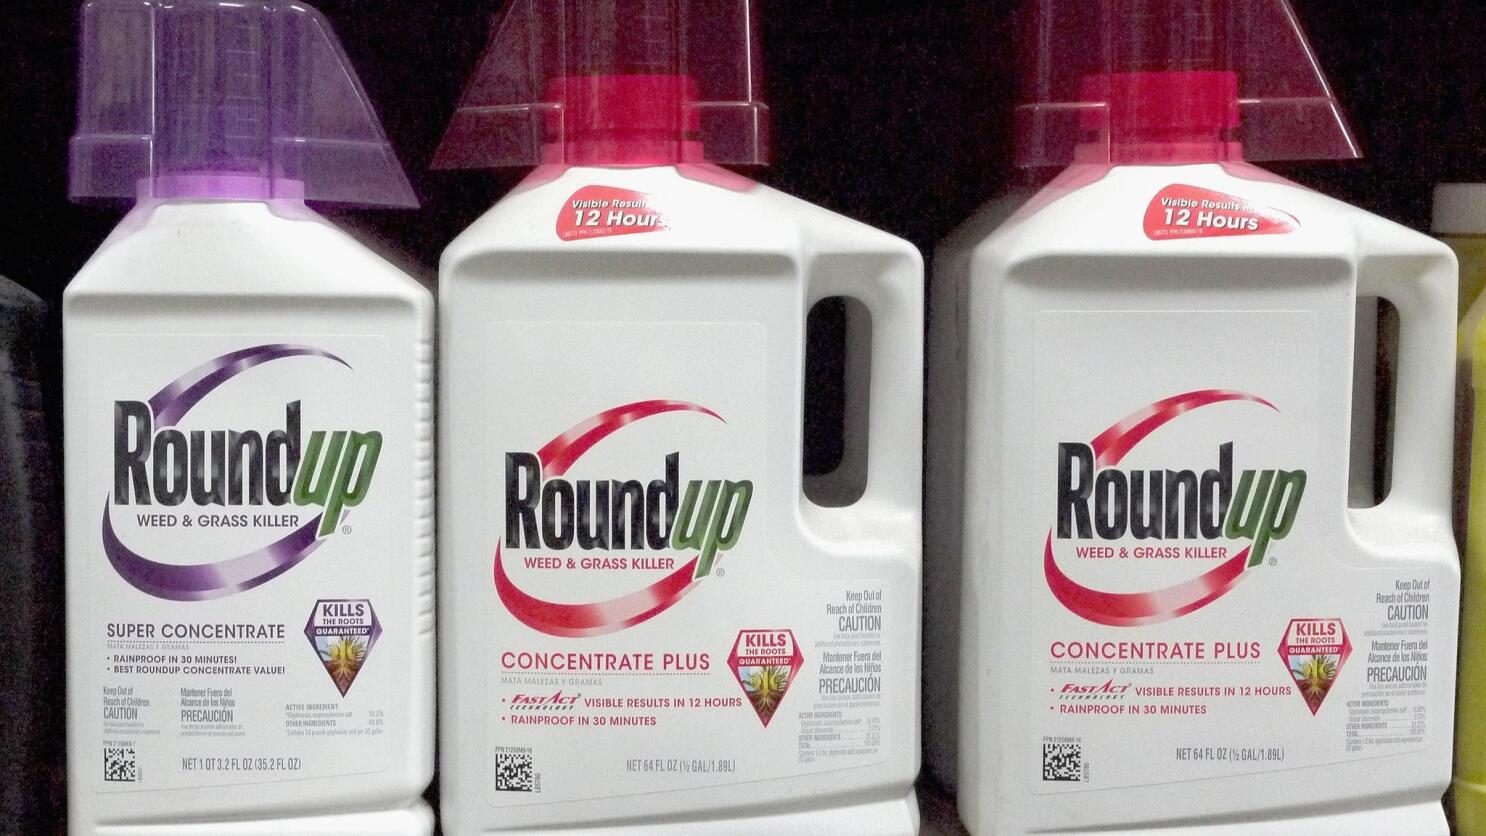 Plaintiff Wins Roundup Weedkiller Appeal But Faces IRS Taxes